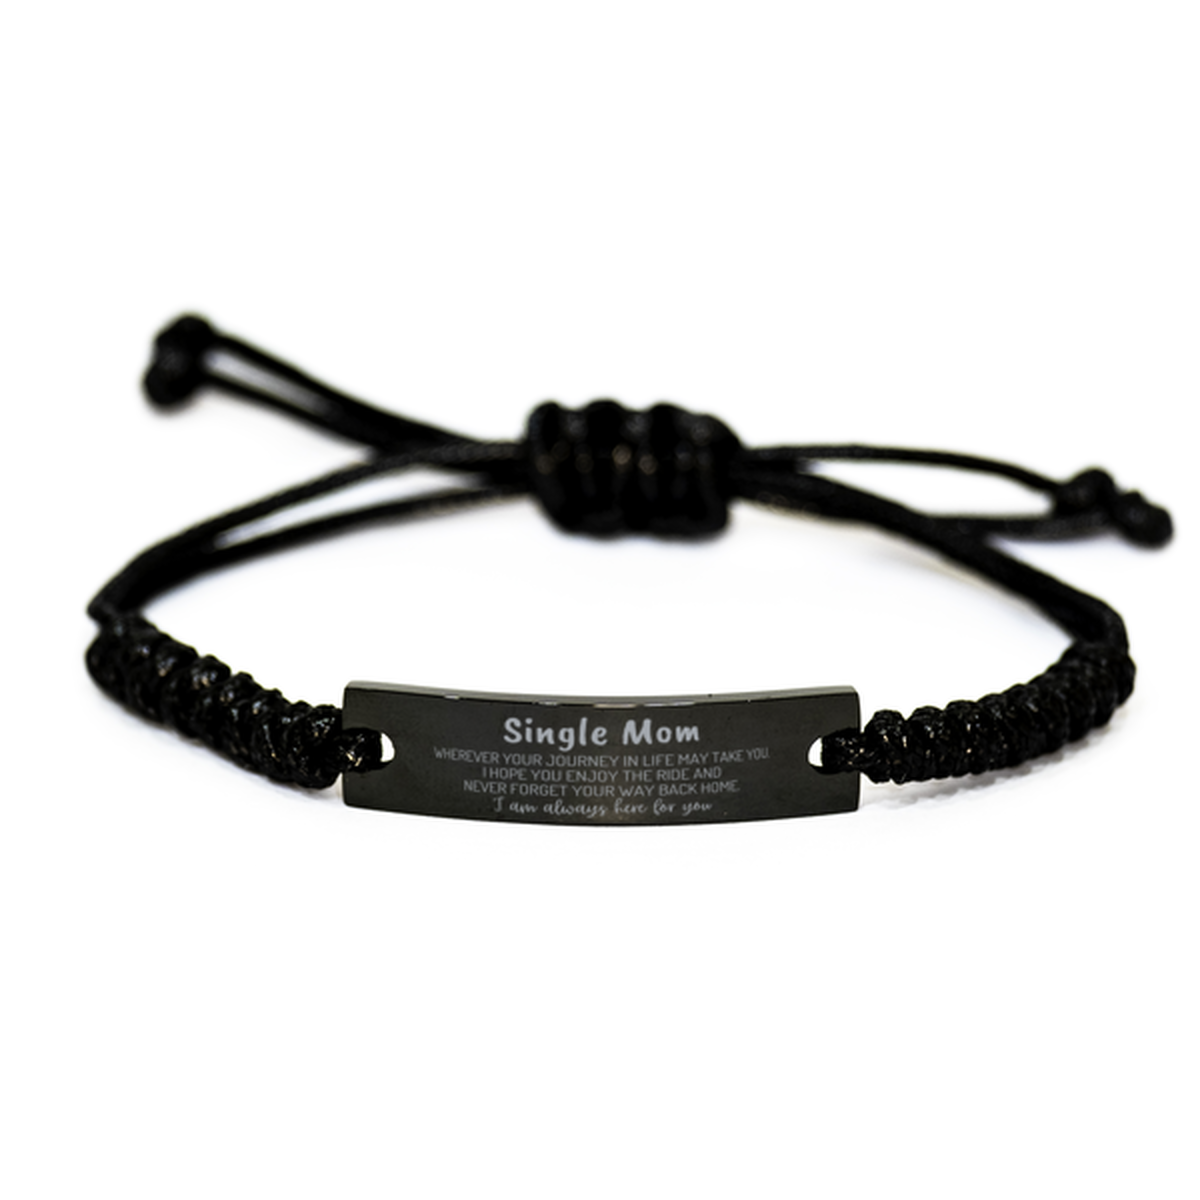 Single Mom wherever your journey in life may take you, I am always here for you Single Mom Black Rope Bracelet, Awesome Christmas Gifts For Single Mom, Single Mom Birthday Gifts for Men Women Family Loved One